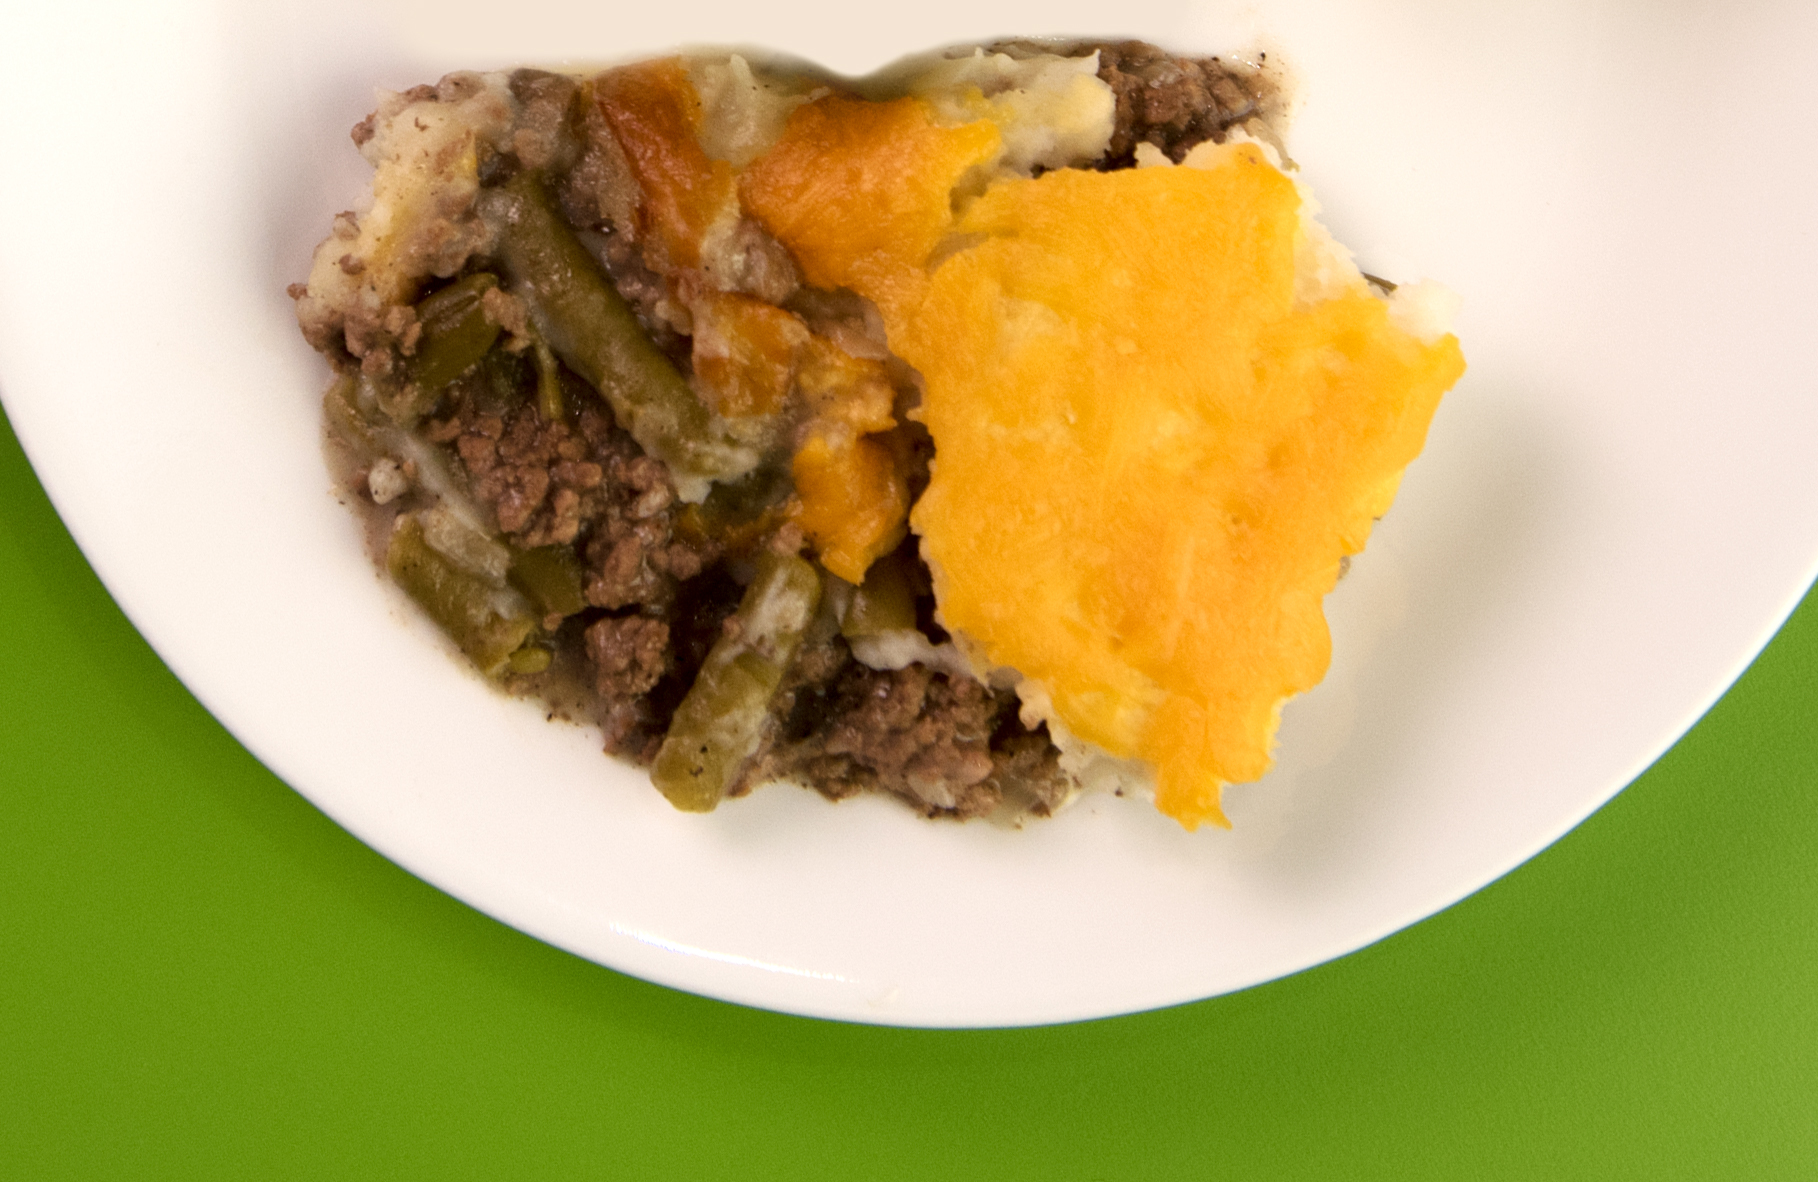 A white plate filled with Shepherd's Pie; a recipe using ground beef, green beans, mashed potatoes, and cheese.